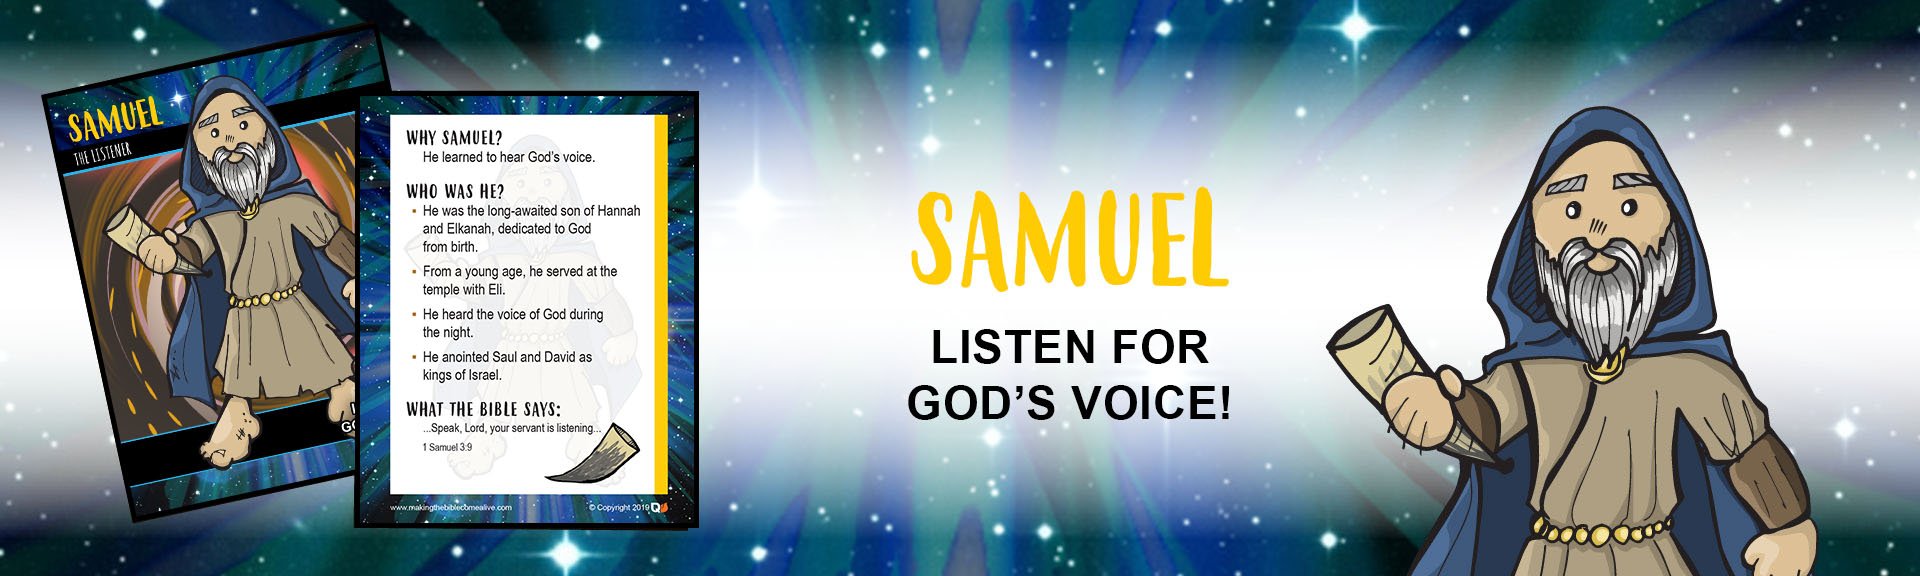 Samuel | Making the Bible Come Alive